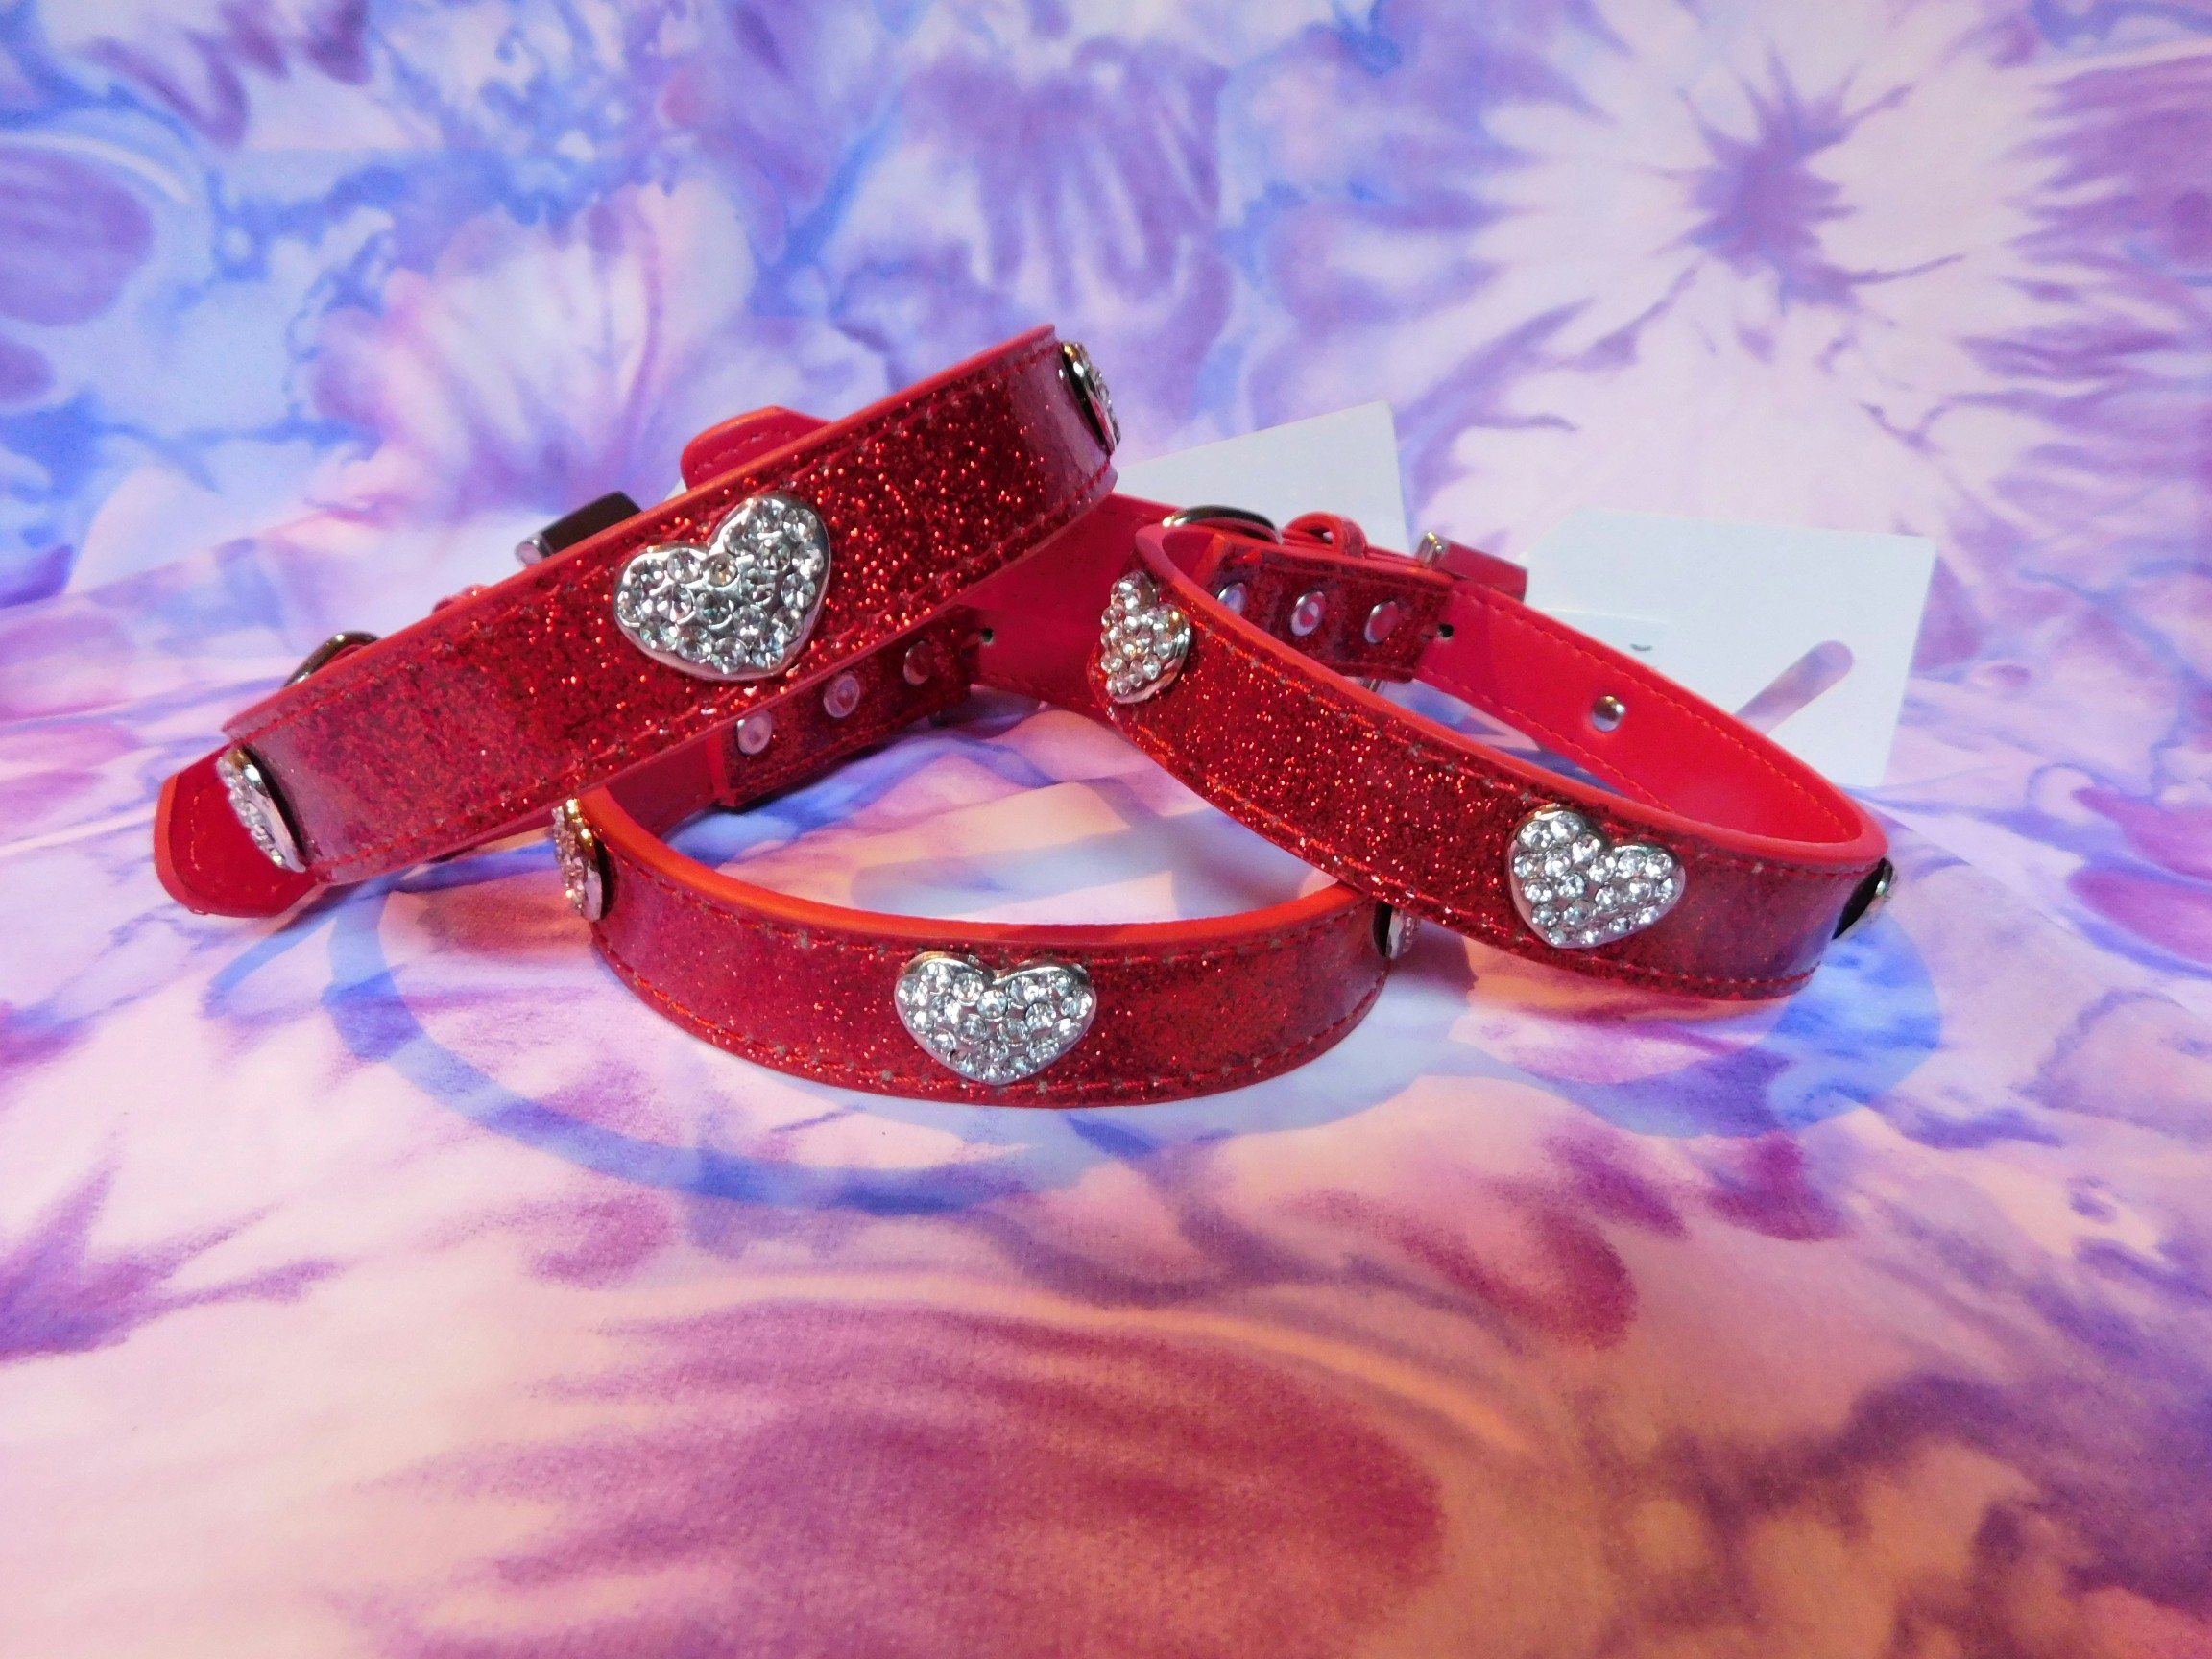 Red dog collar with heart shaped crystals